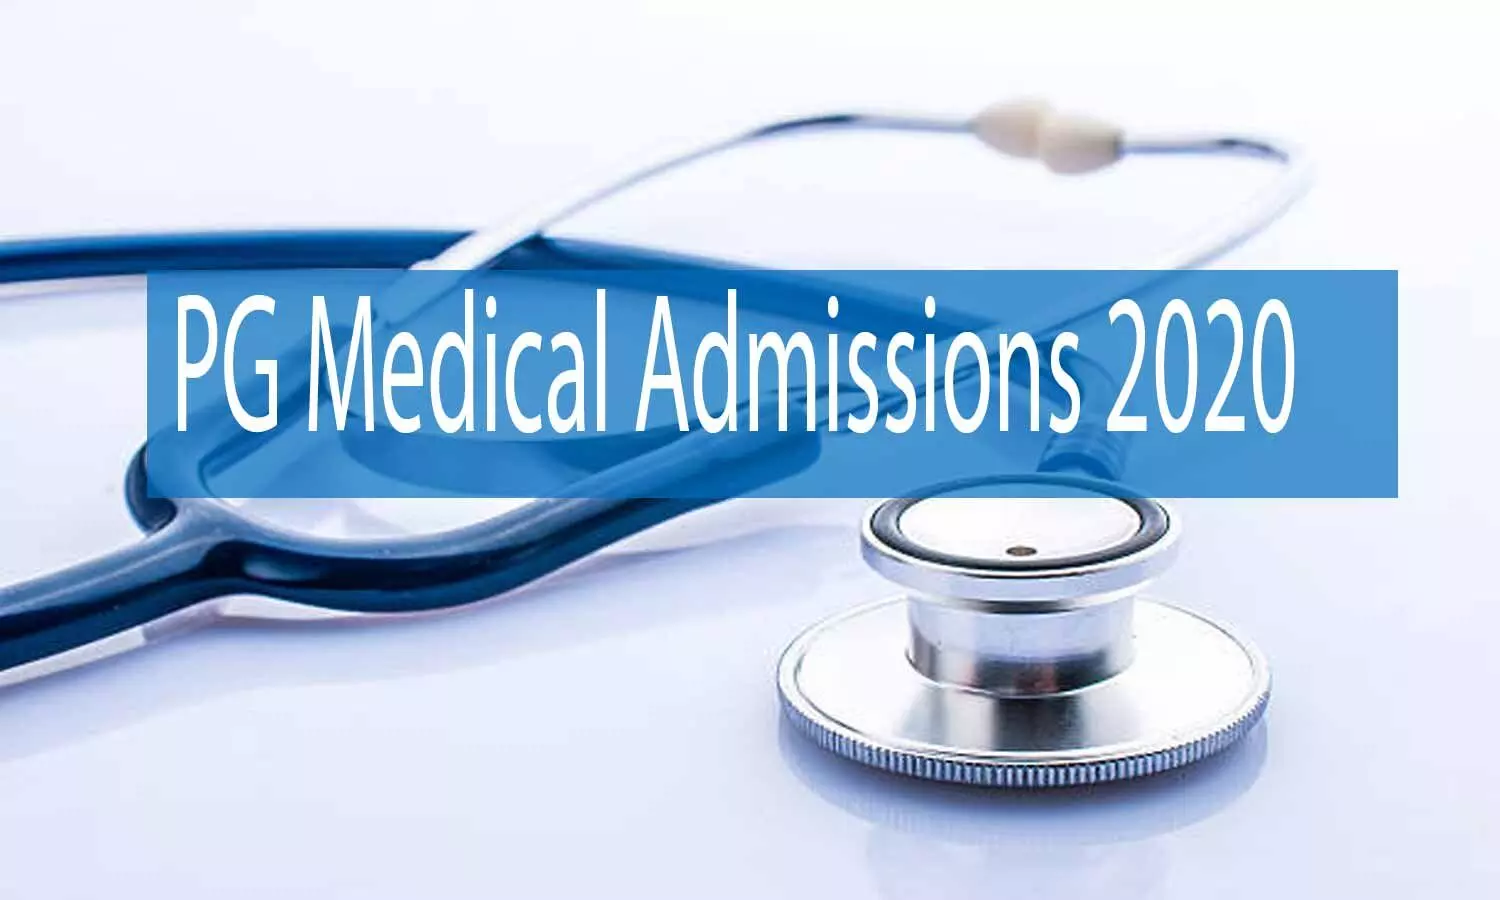 PG Medical Admissions 2020: TN Health publishes allotment order